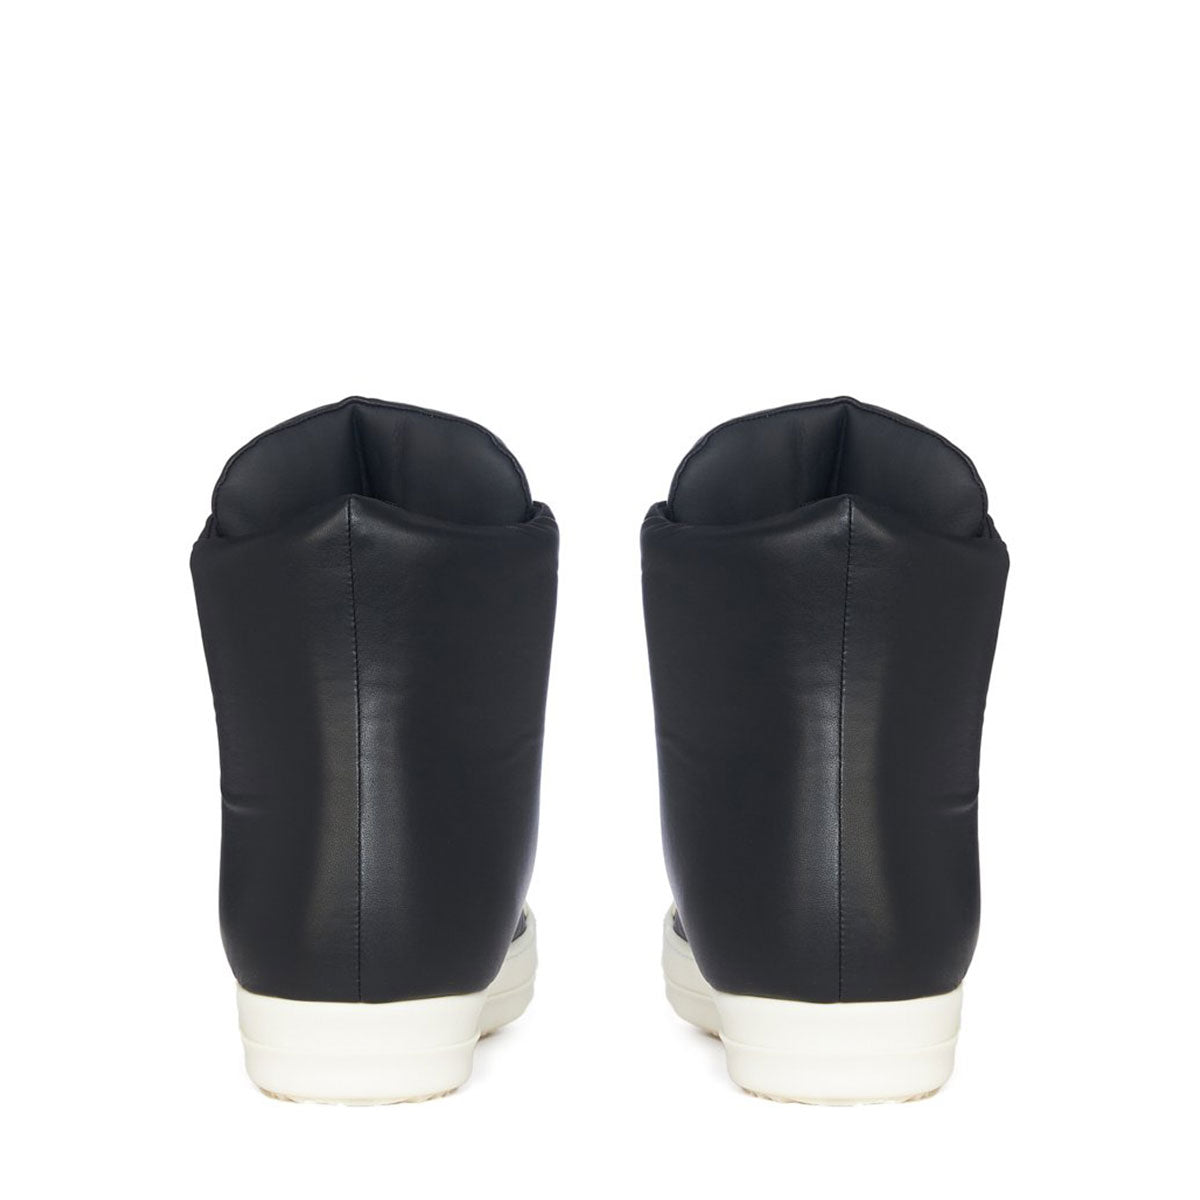 RICK OWENS SHOES RP02C1878LLPW2 911